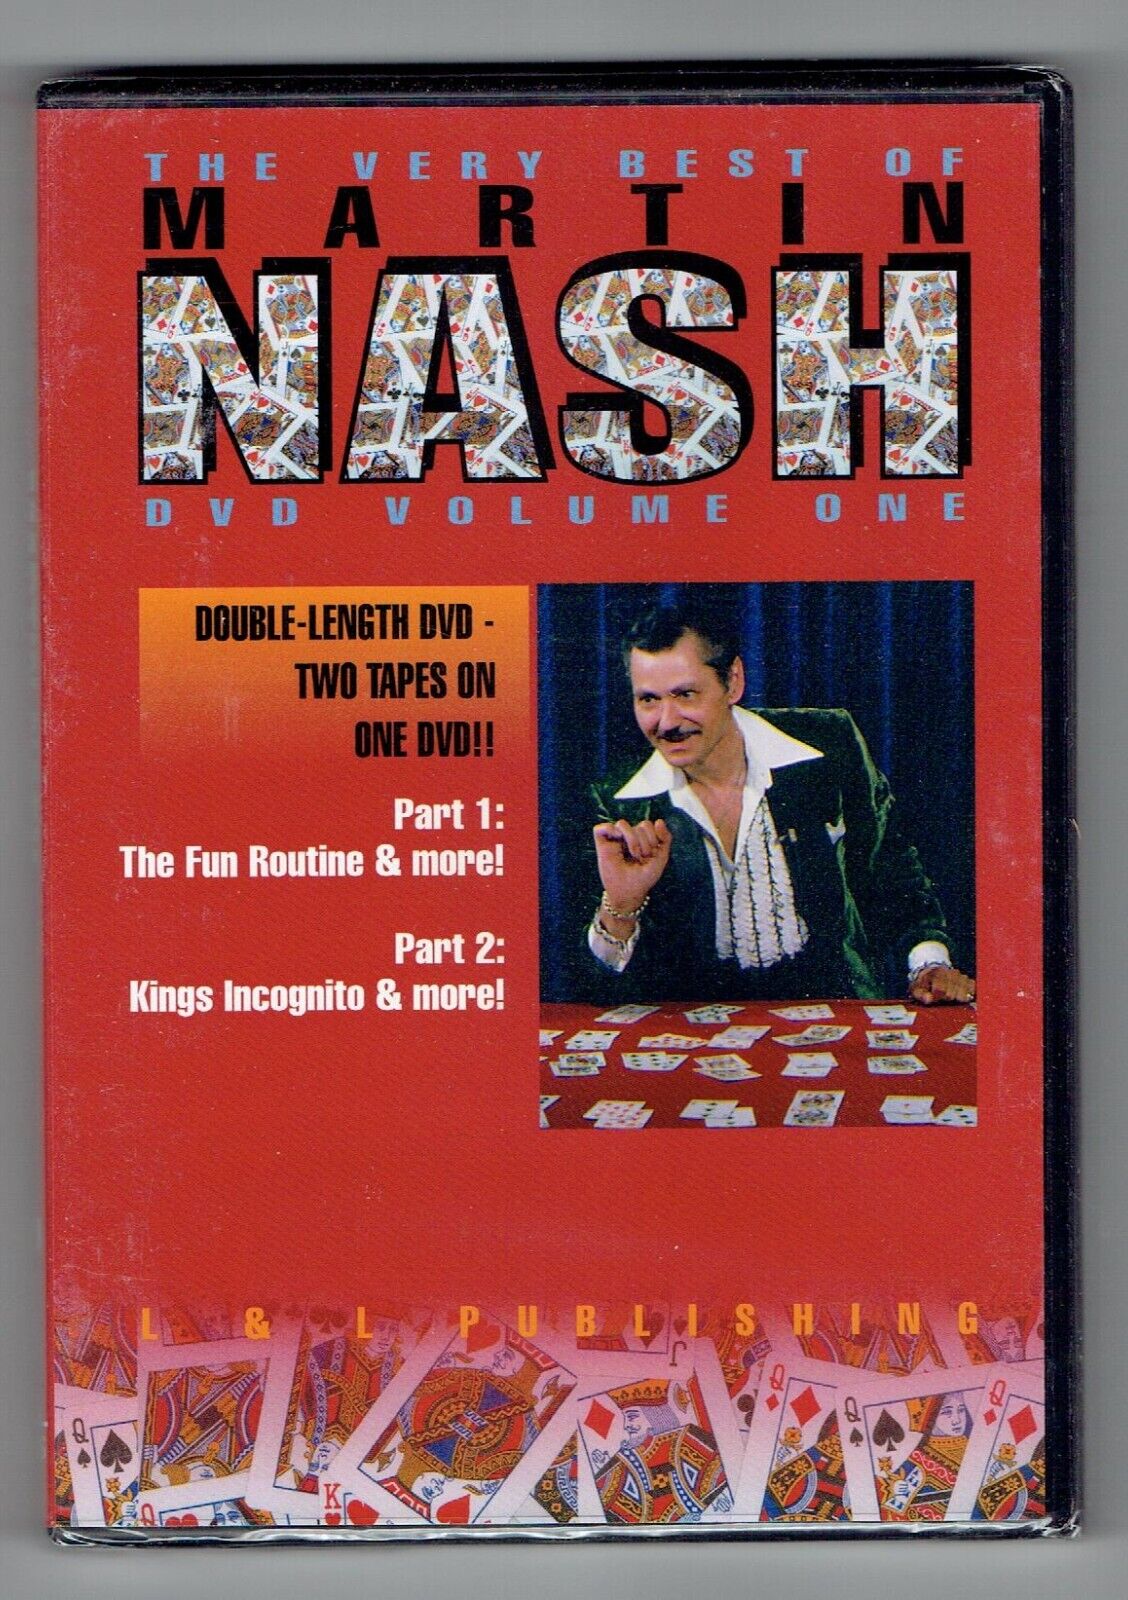 CLEARANCE SALE - Very Best of Martin Nash Volume 1 by L&L Publishing